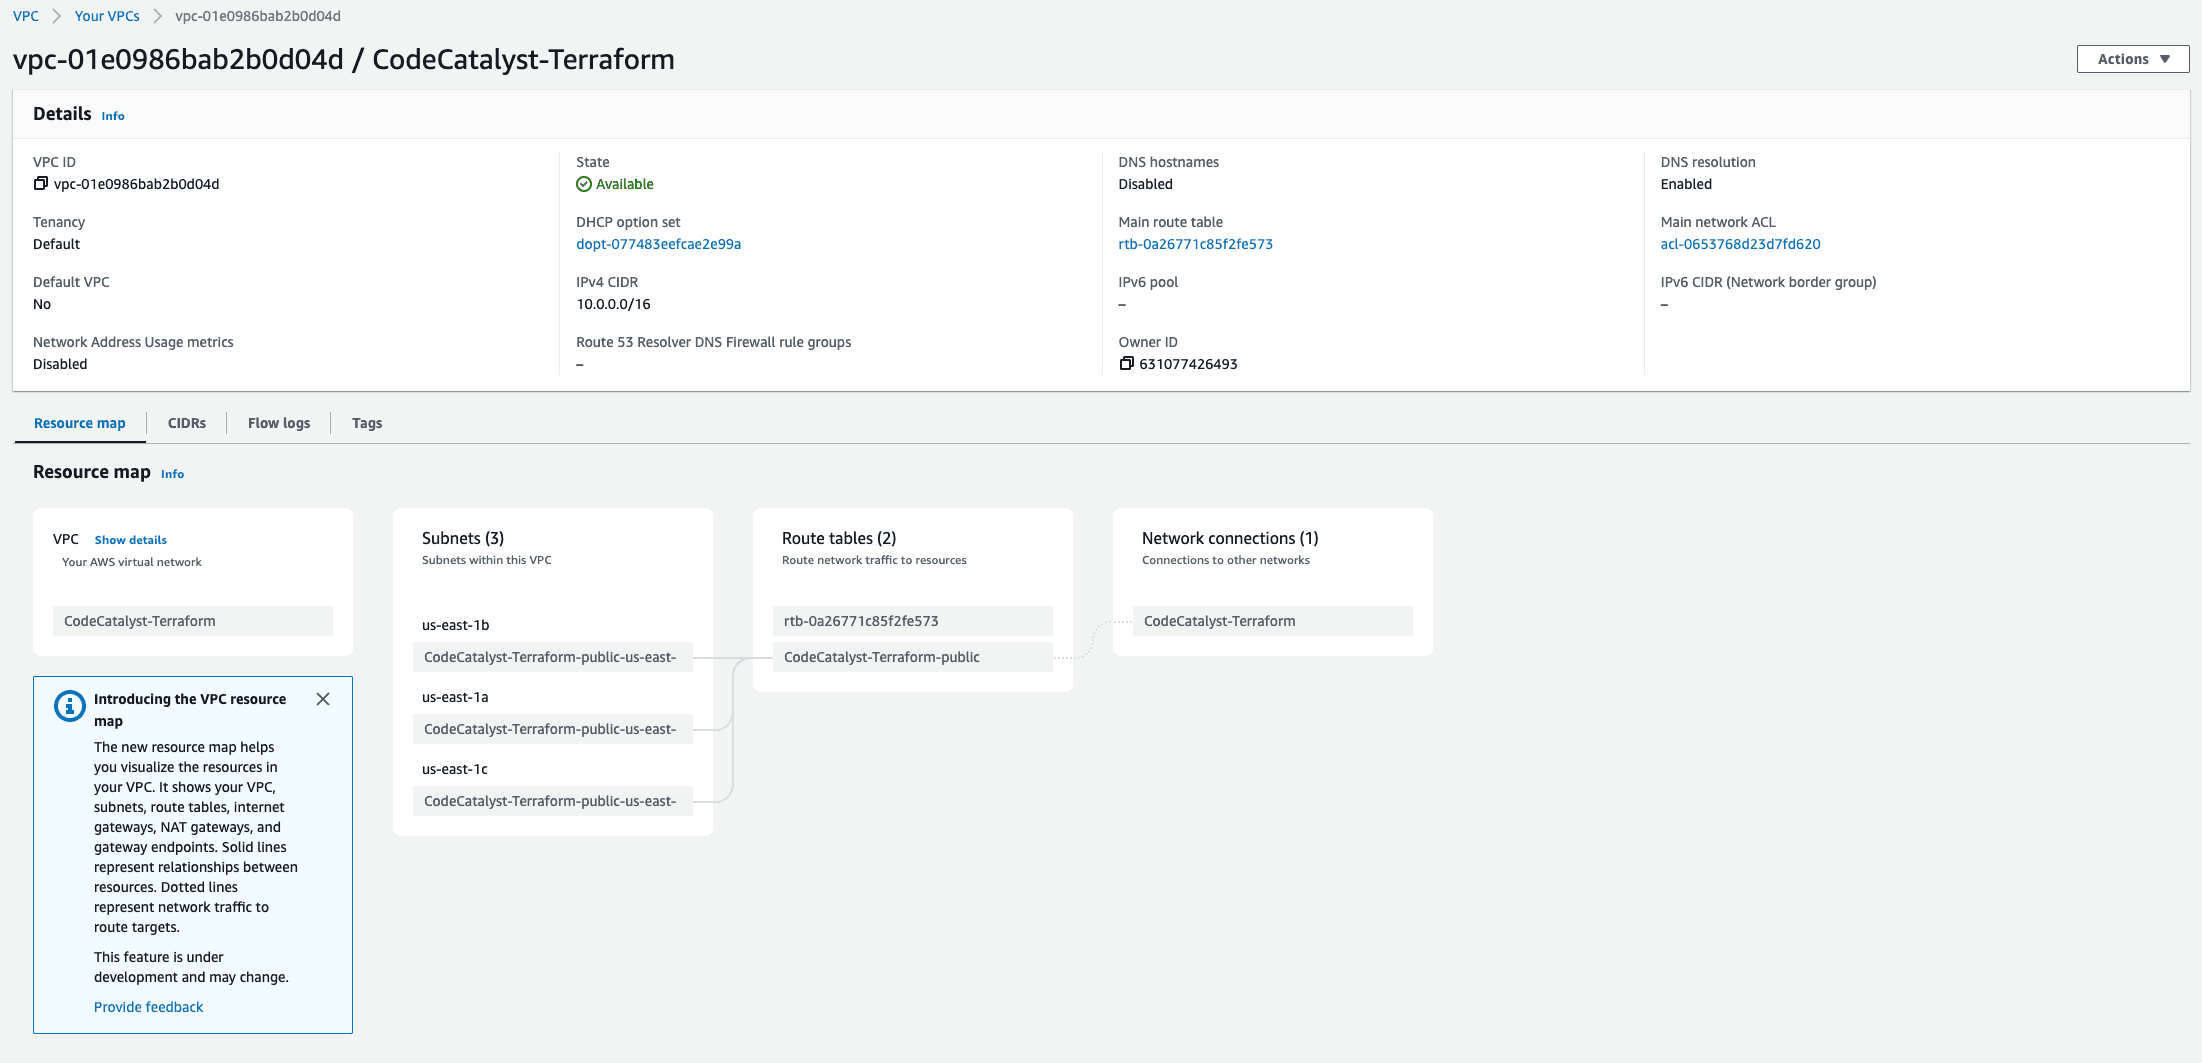 AWS Console displaying details of the VPC just created